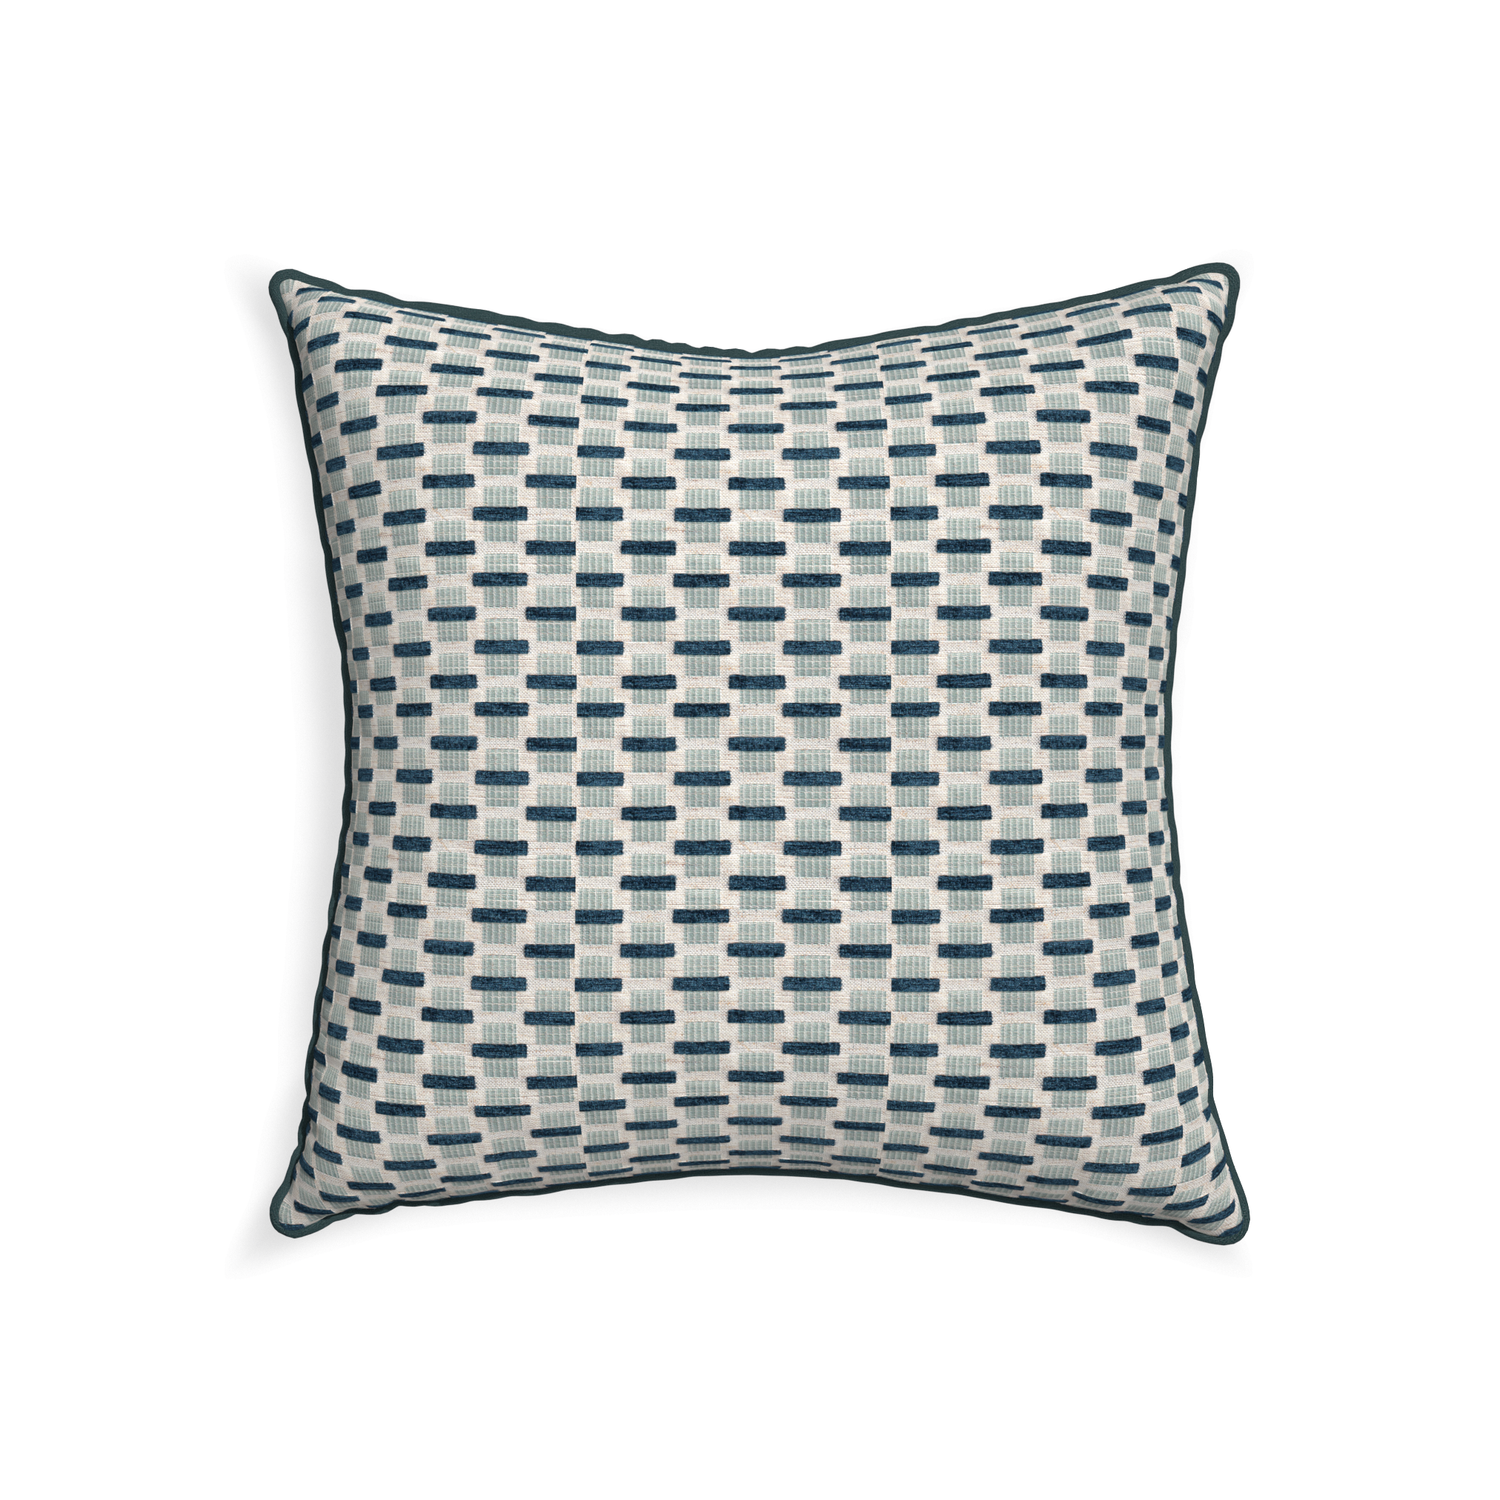 22-square willow amalfi custom blue geometric chenillepillow with p piping on white background